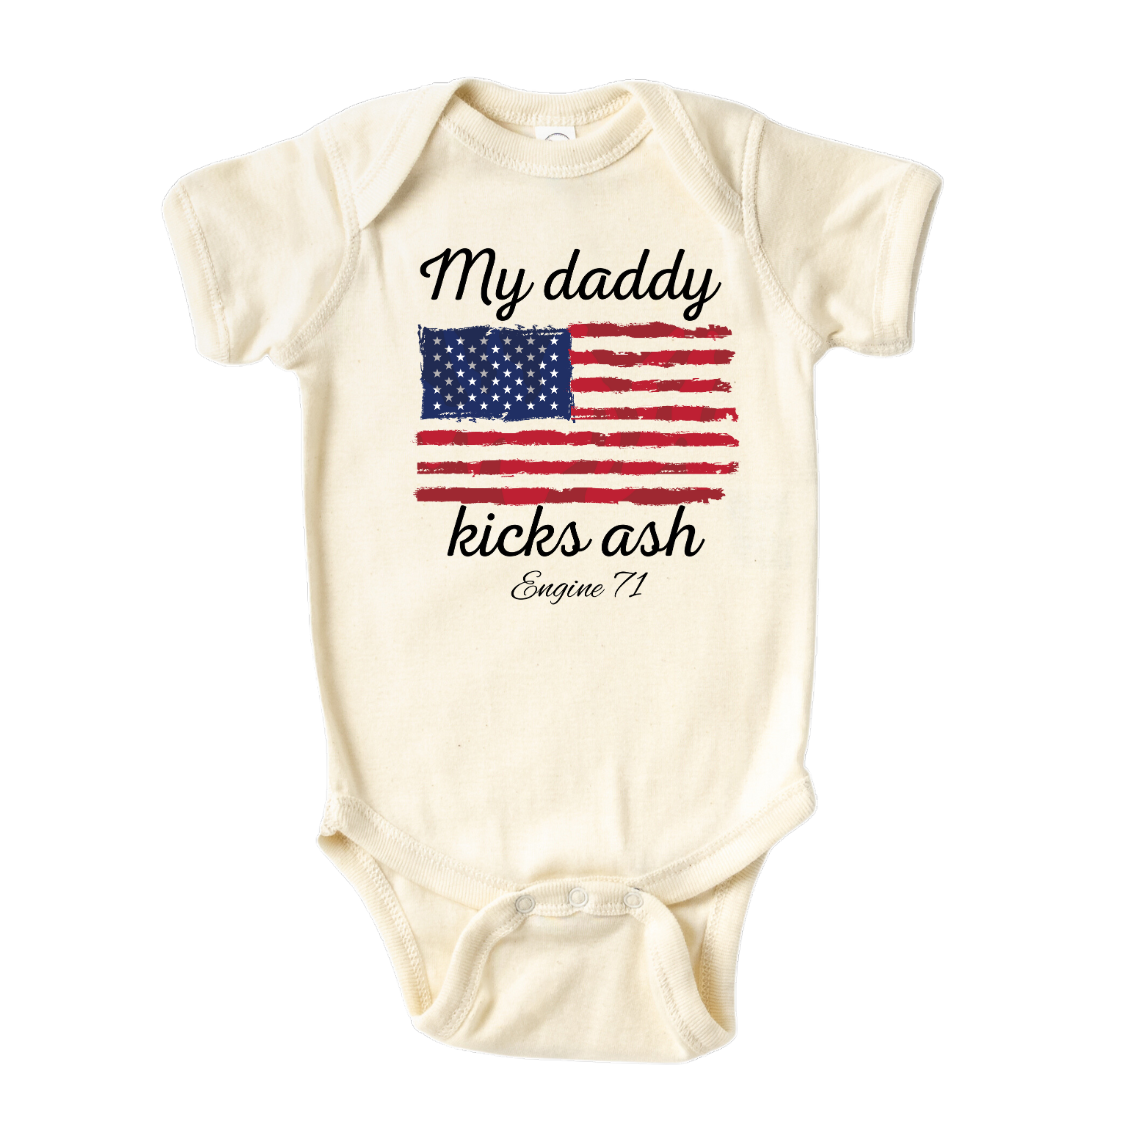 Natural Onesie with a cute printed design of American flag theme, customizable with the text 'My Daddy Kicks Assh'.